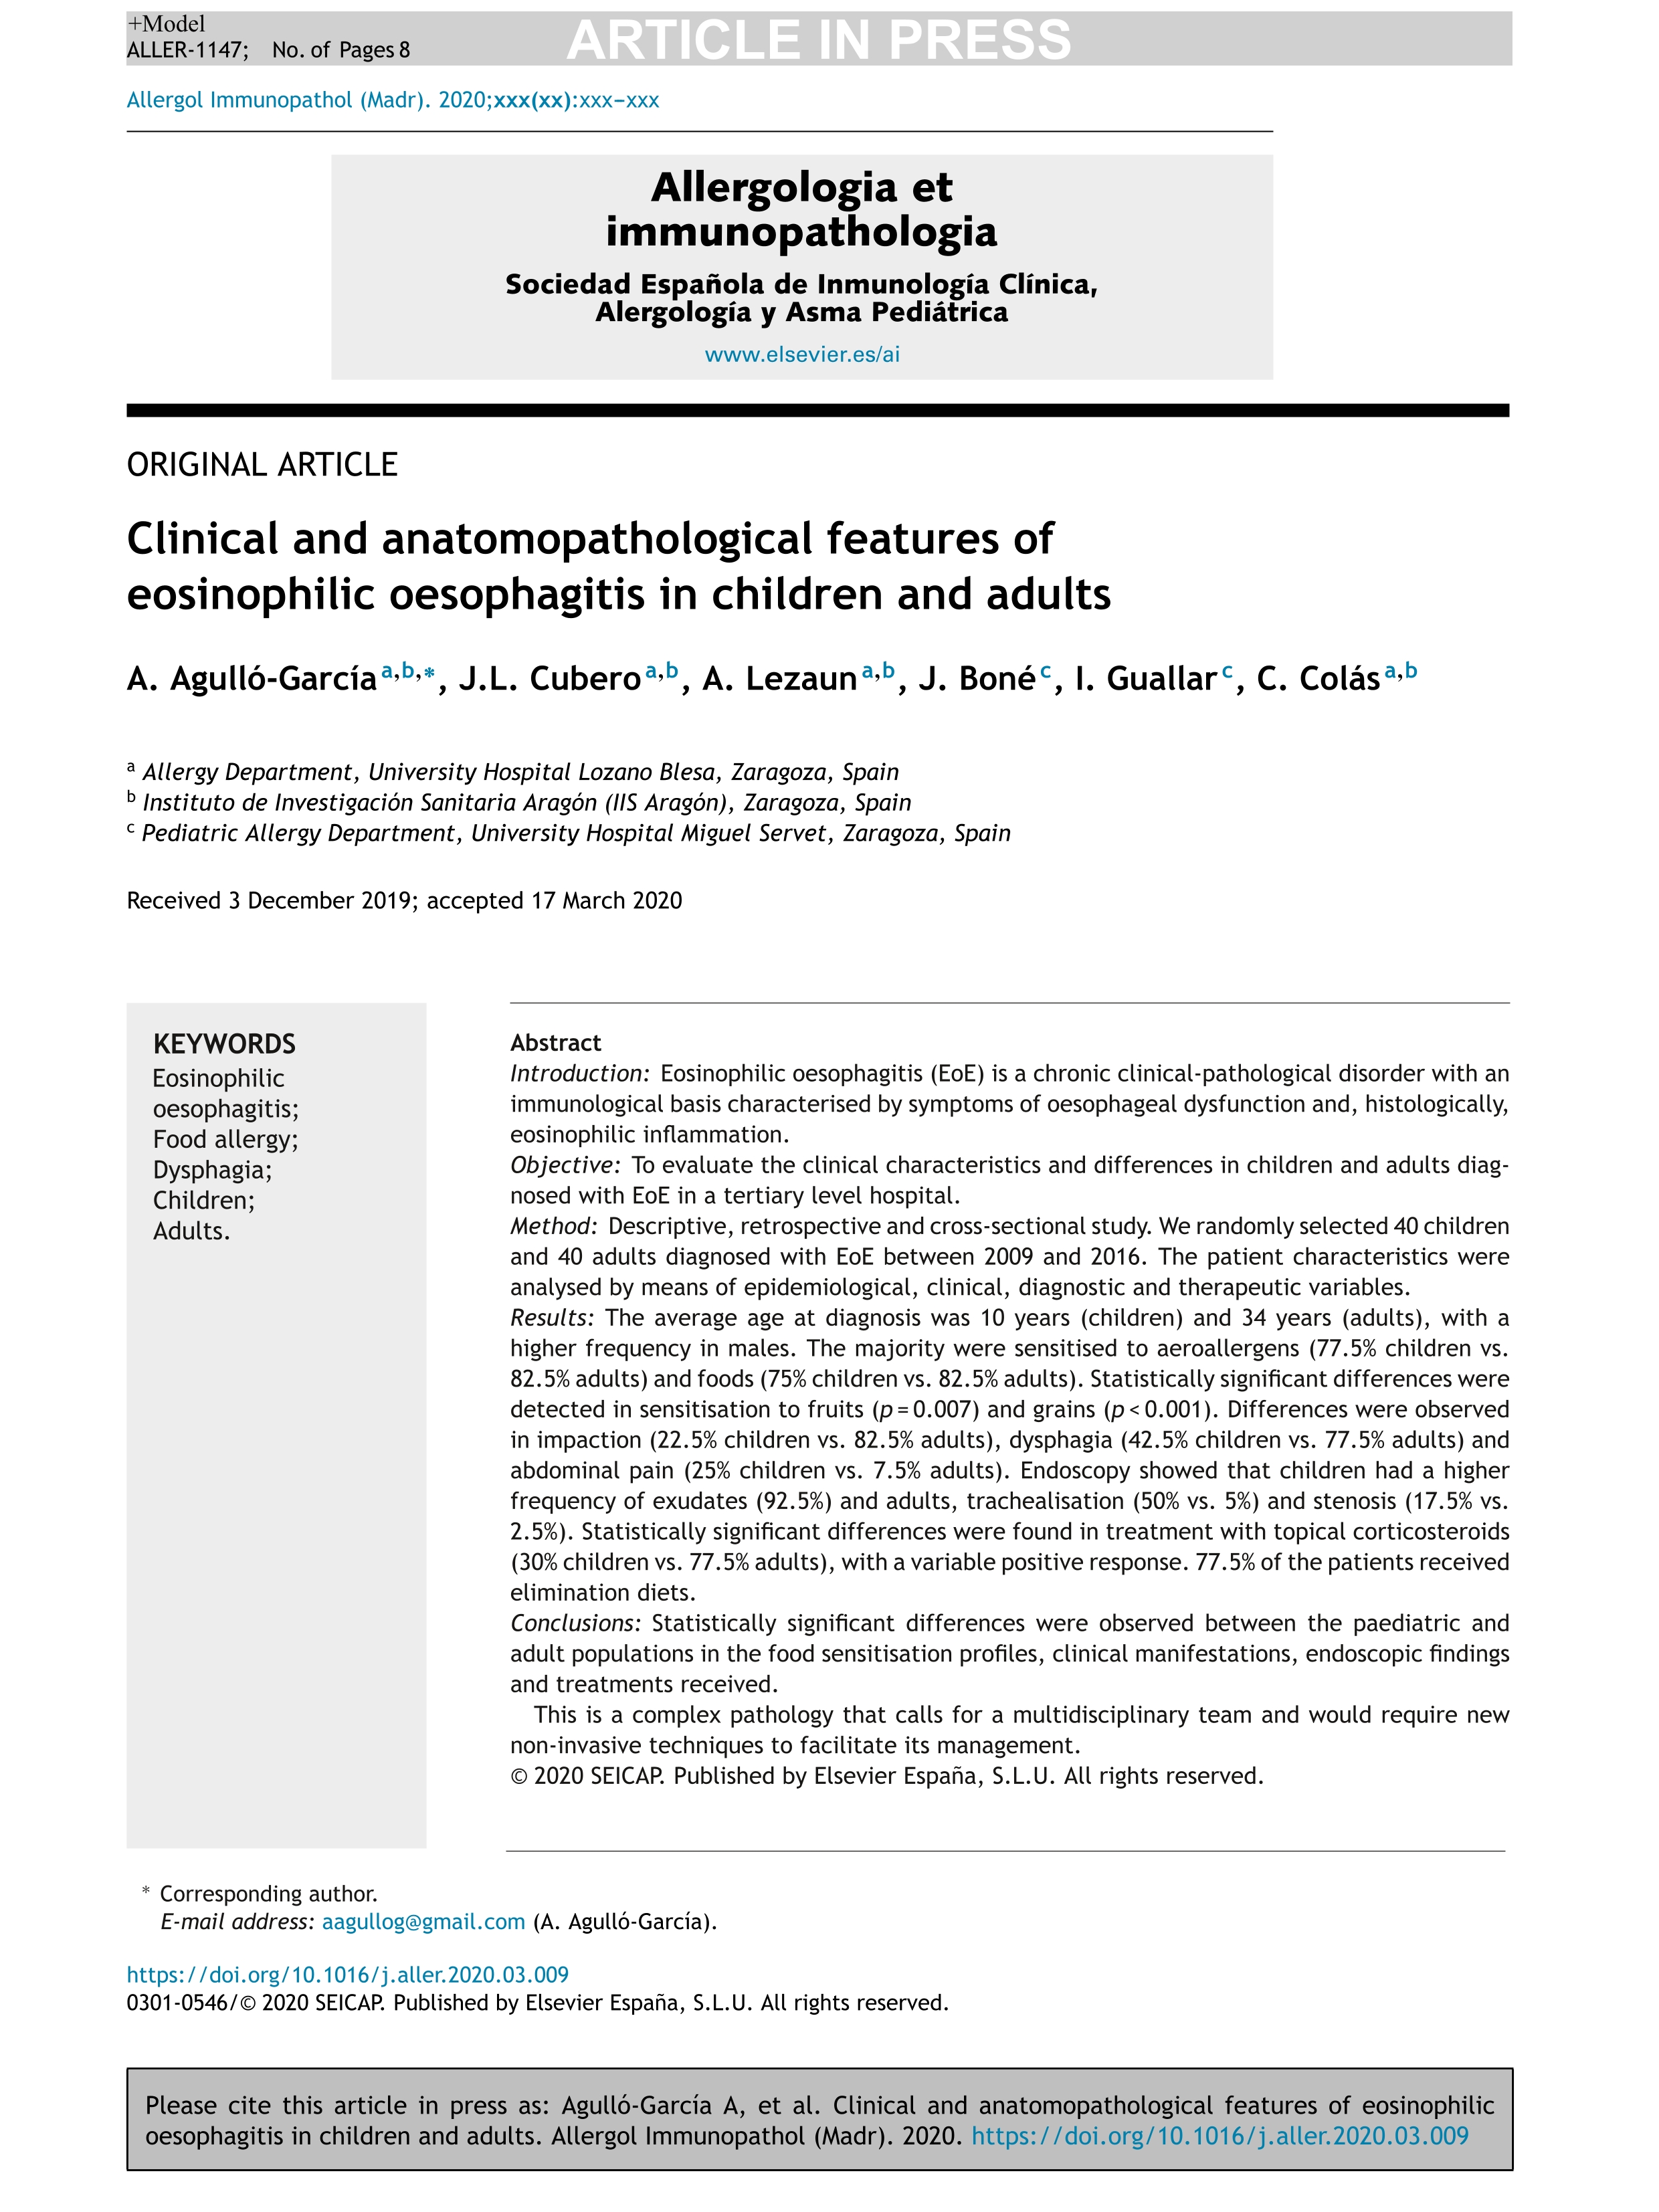 Clinical and anatomopathological features of eosinophilic oesophagitis in children and adults